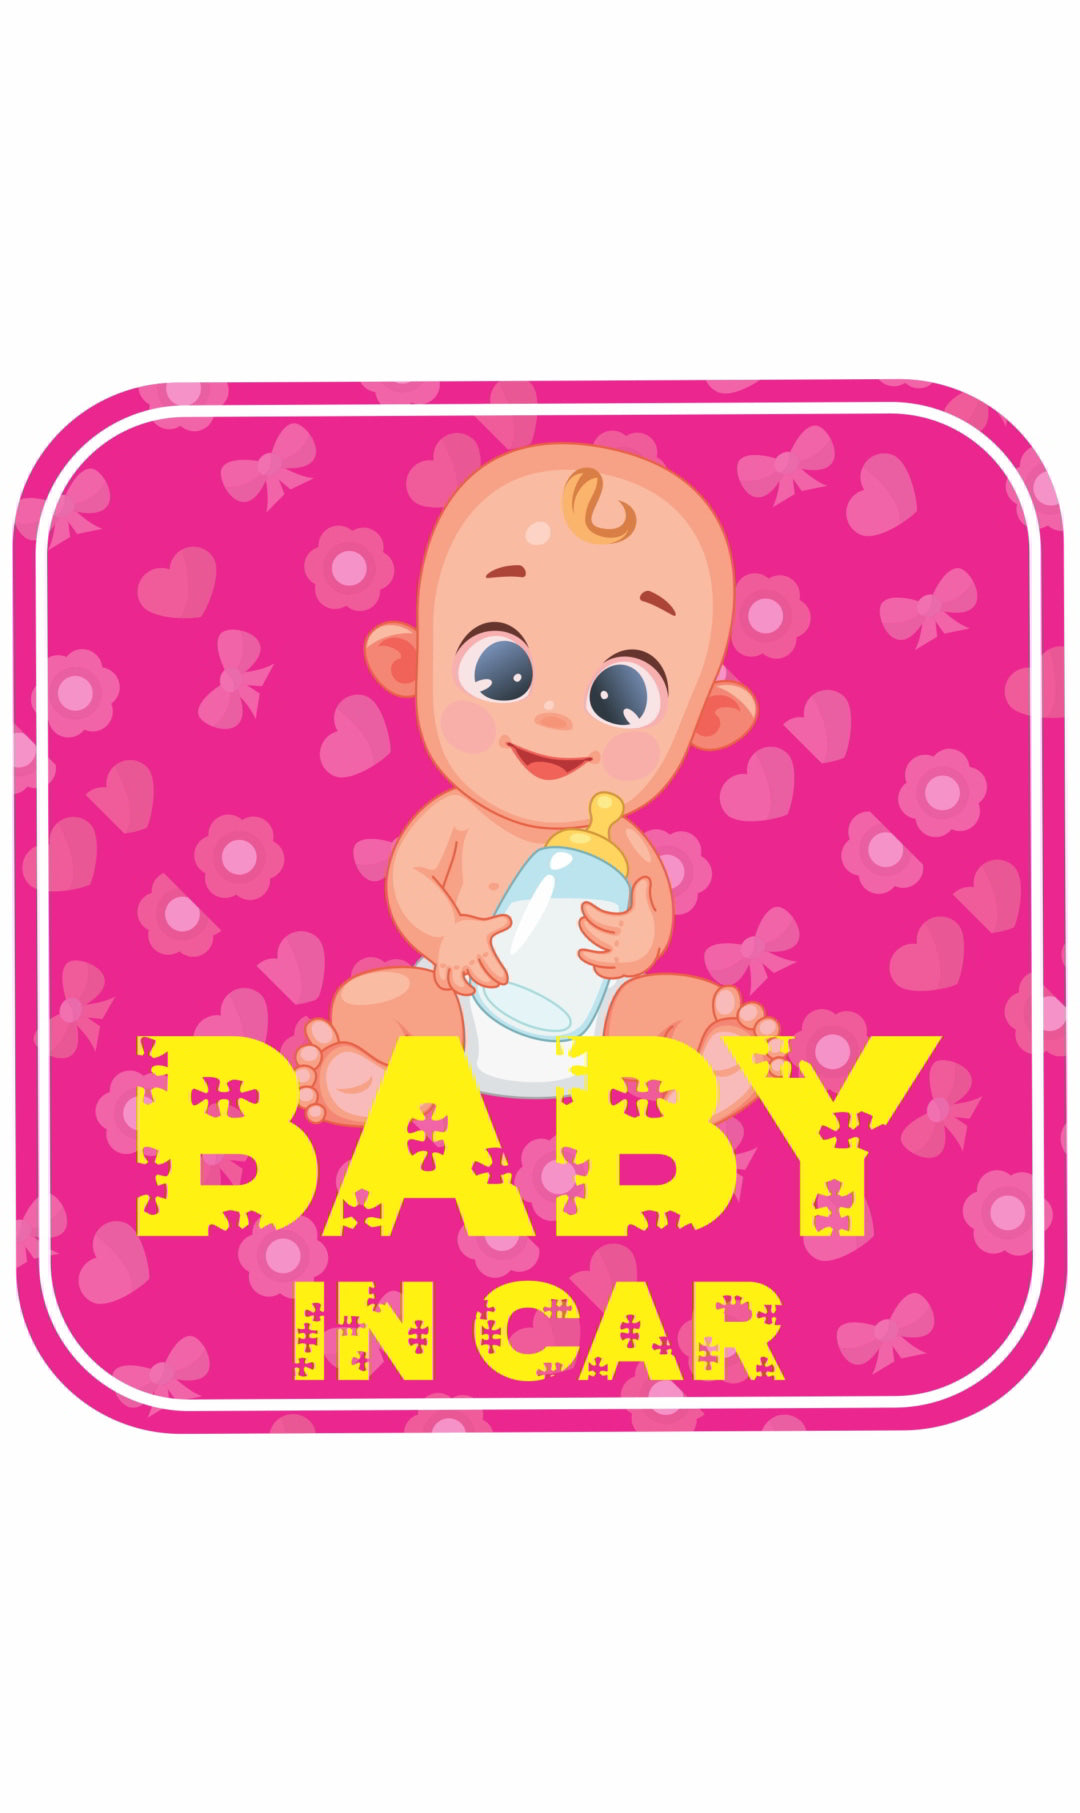 Baby in Car Decal Sticker(2pc)_c34